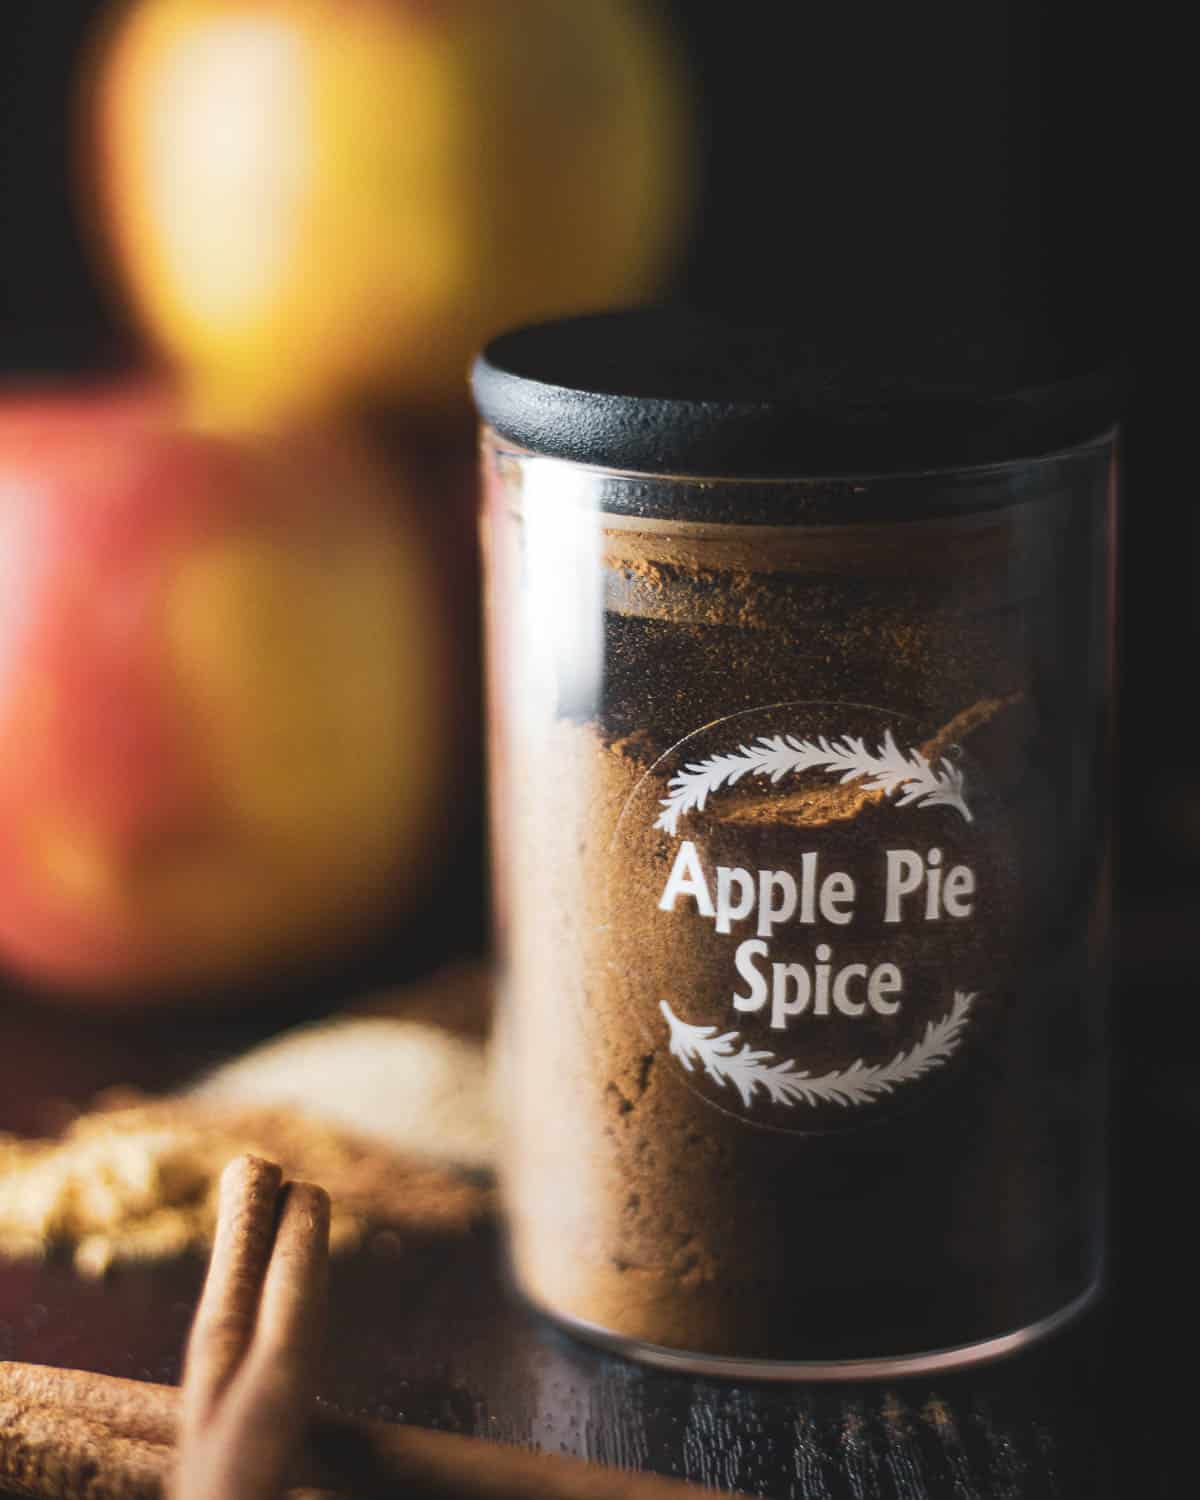 apple pie spice in a spice jar with apples and cinnamon sticks in the background